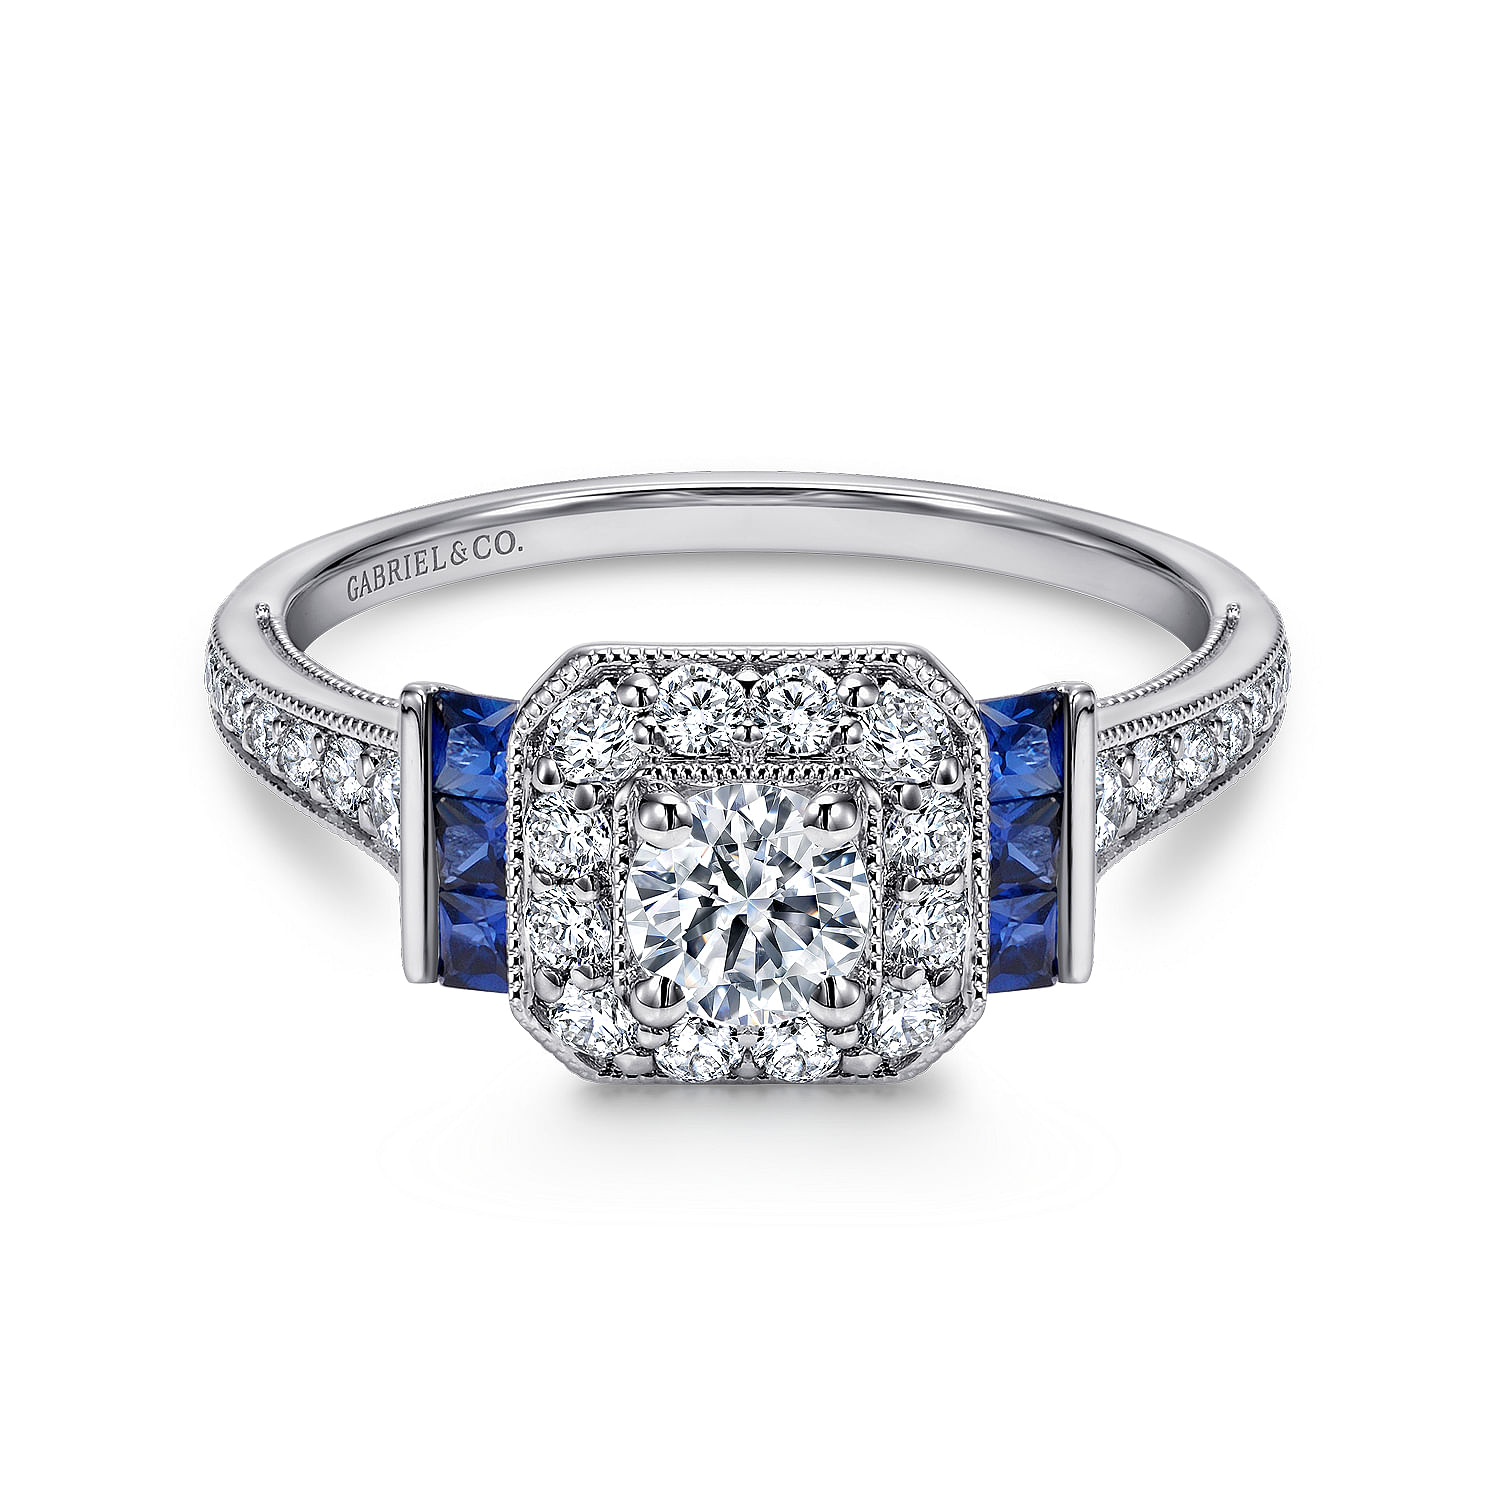 Sylvia - Vintage Inspired 14K White Gold Round Halo Sapphire and Diamond Engagement Ring